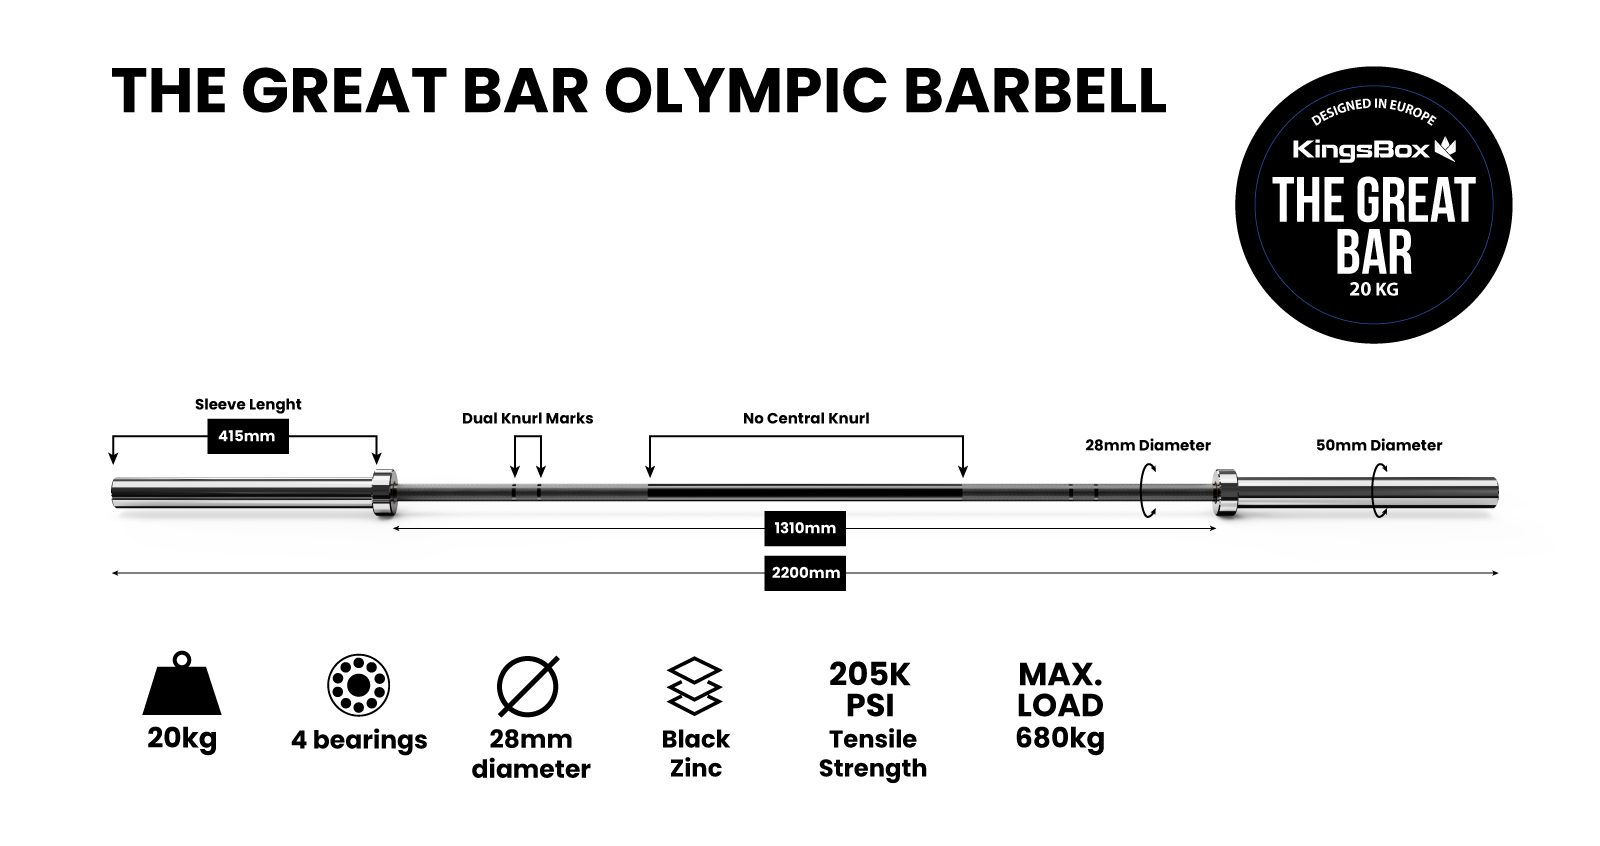 The Great BarThe Great Bar Olympic Barbell | KingsBox